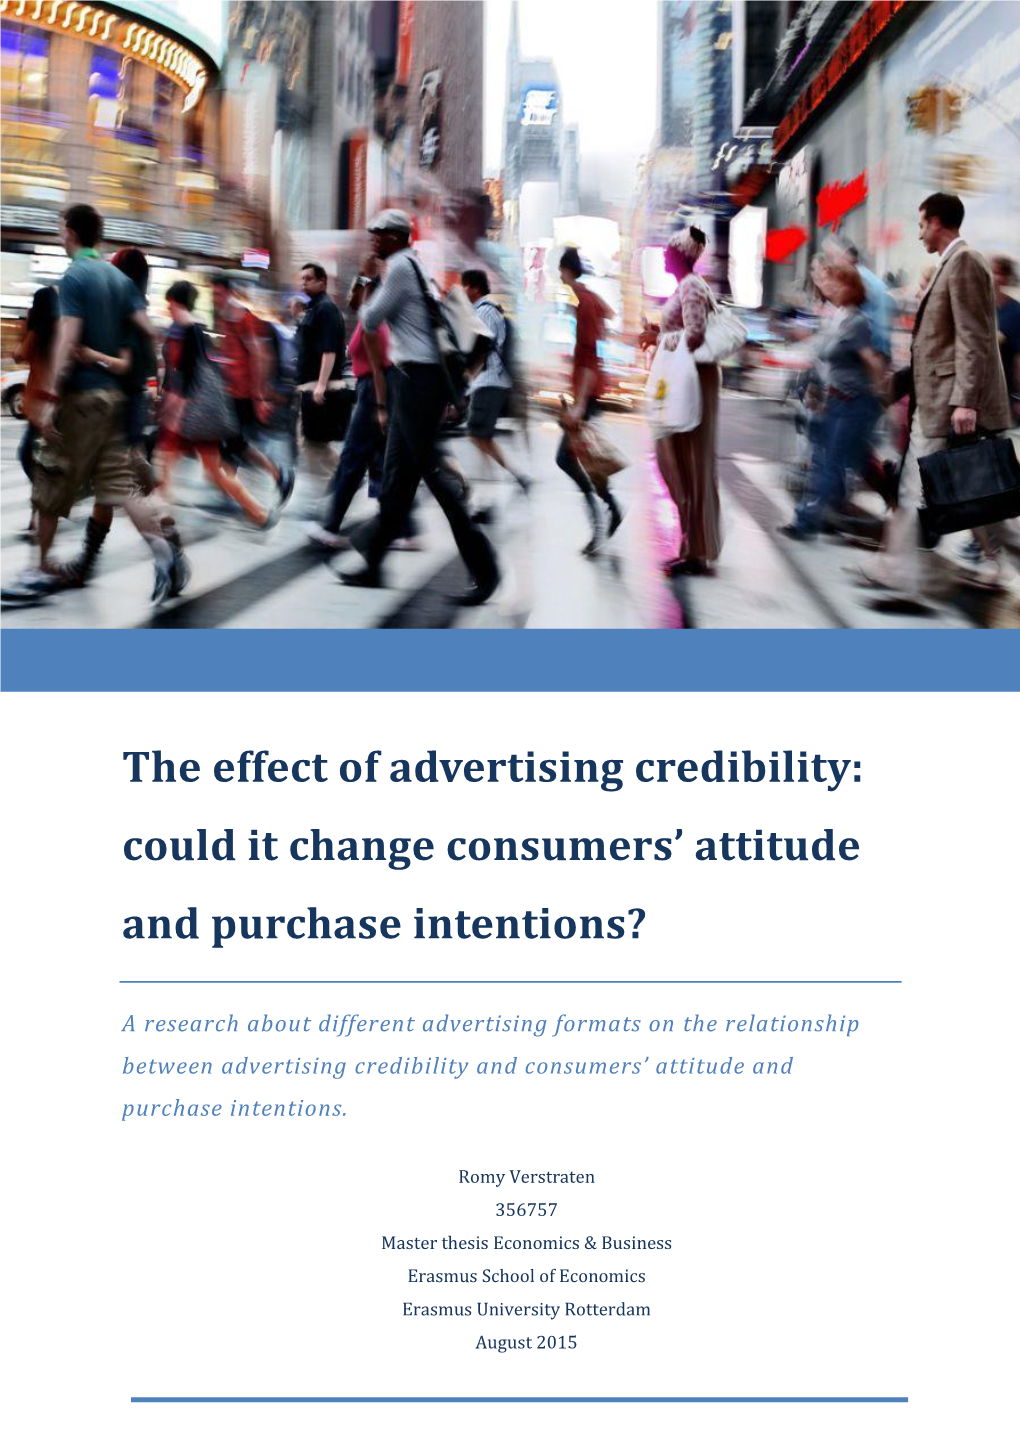 The Effect of Advertising Credibility: Could It Change Consumers' Attitude